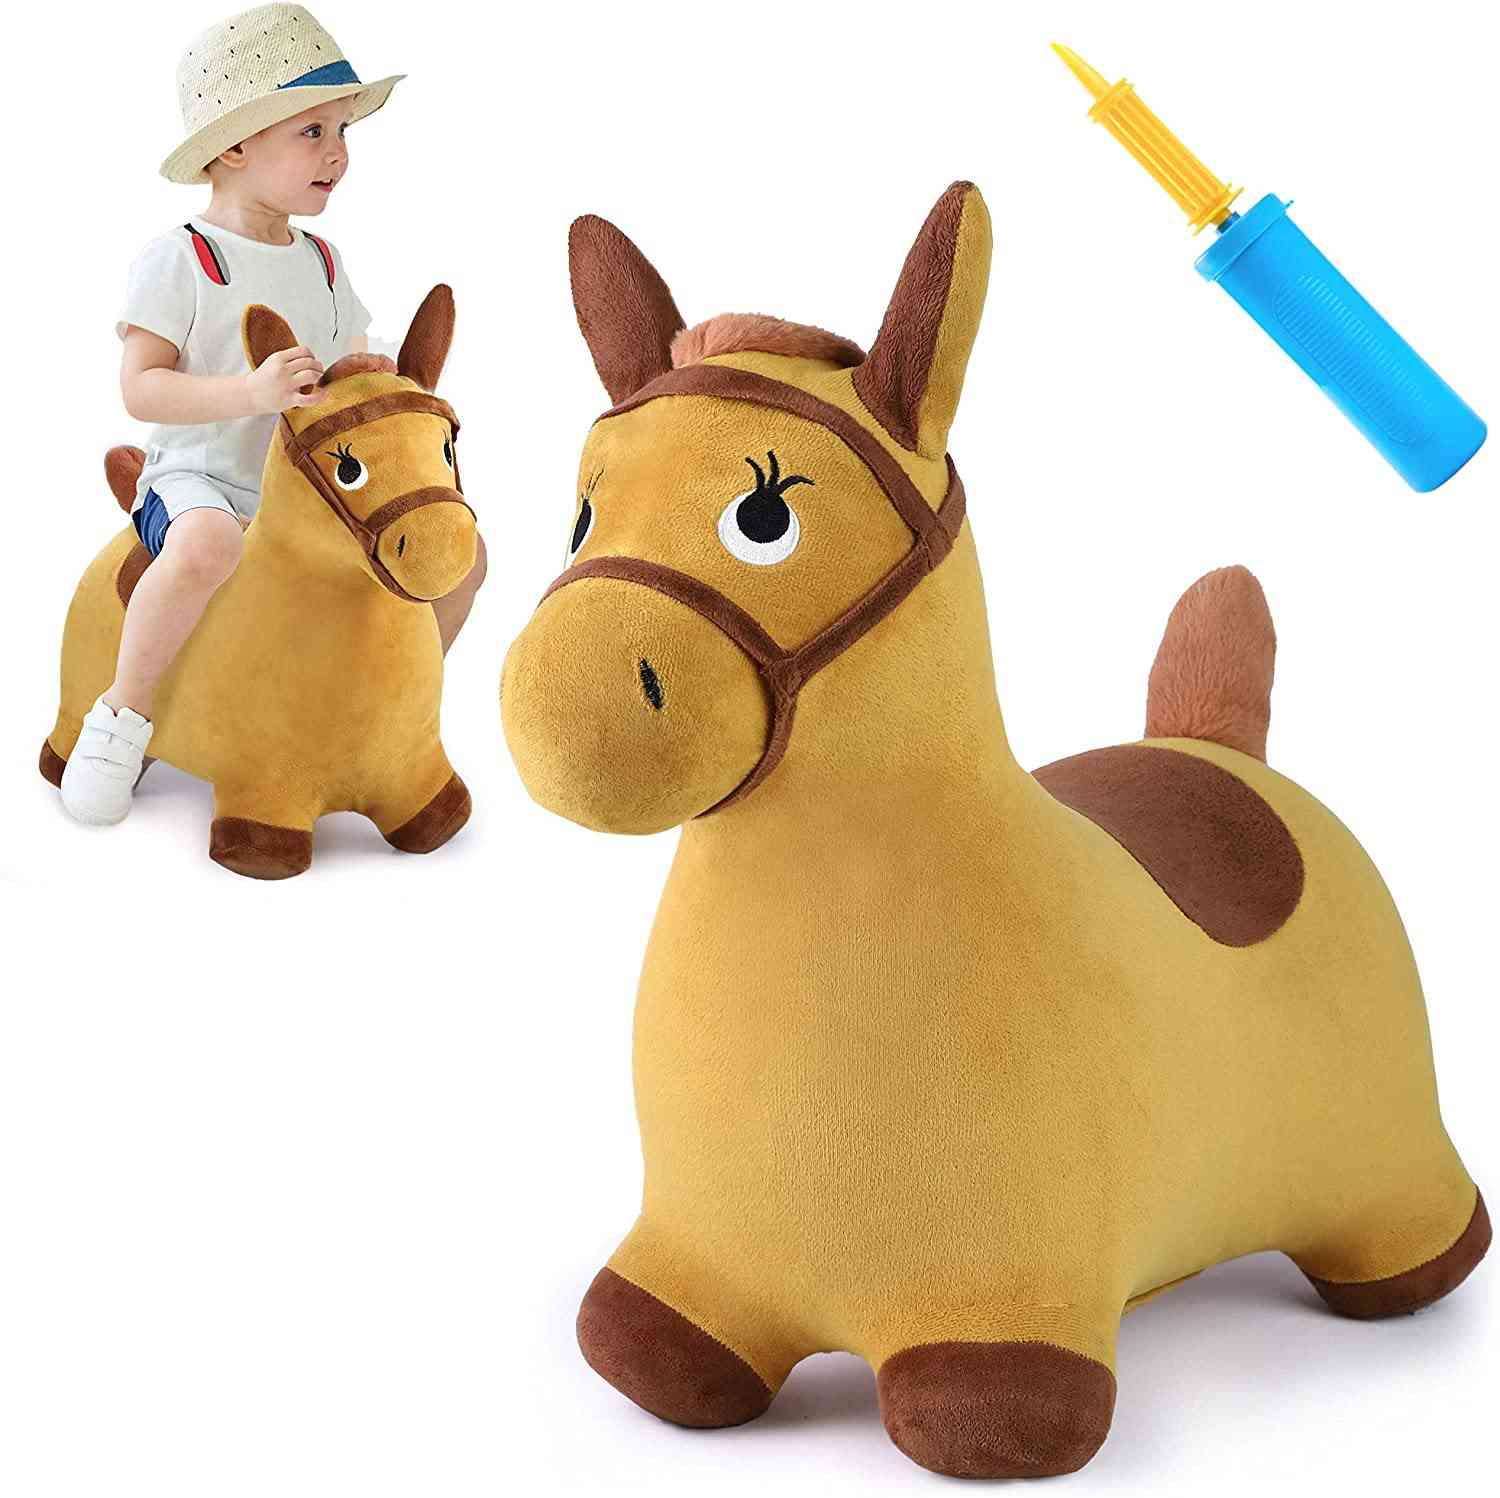 Kids Ride On Bouncy Play Yellow Hopping Horse Plush Inflatable Hopper